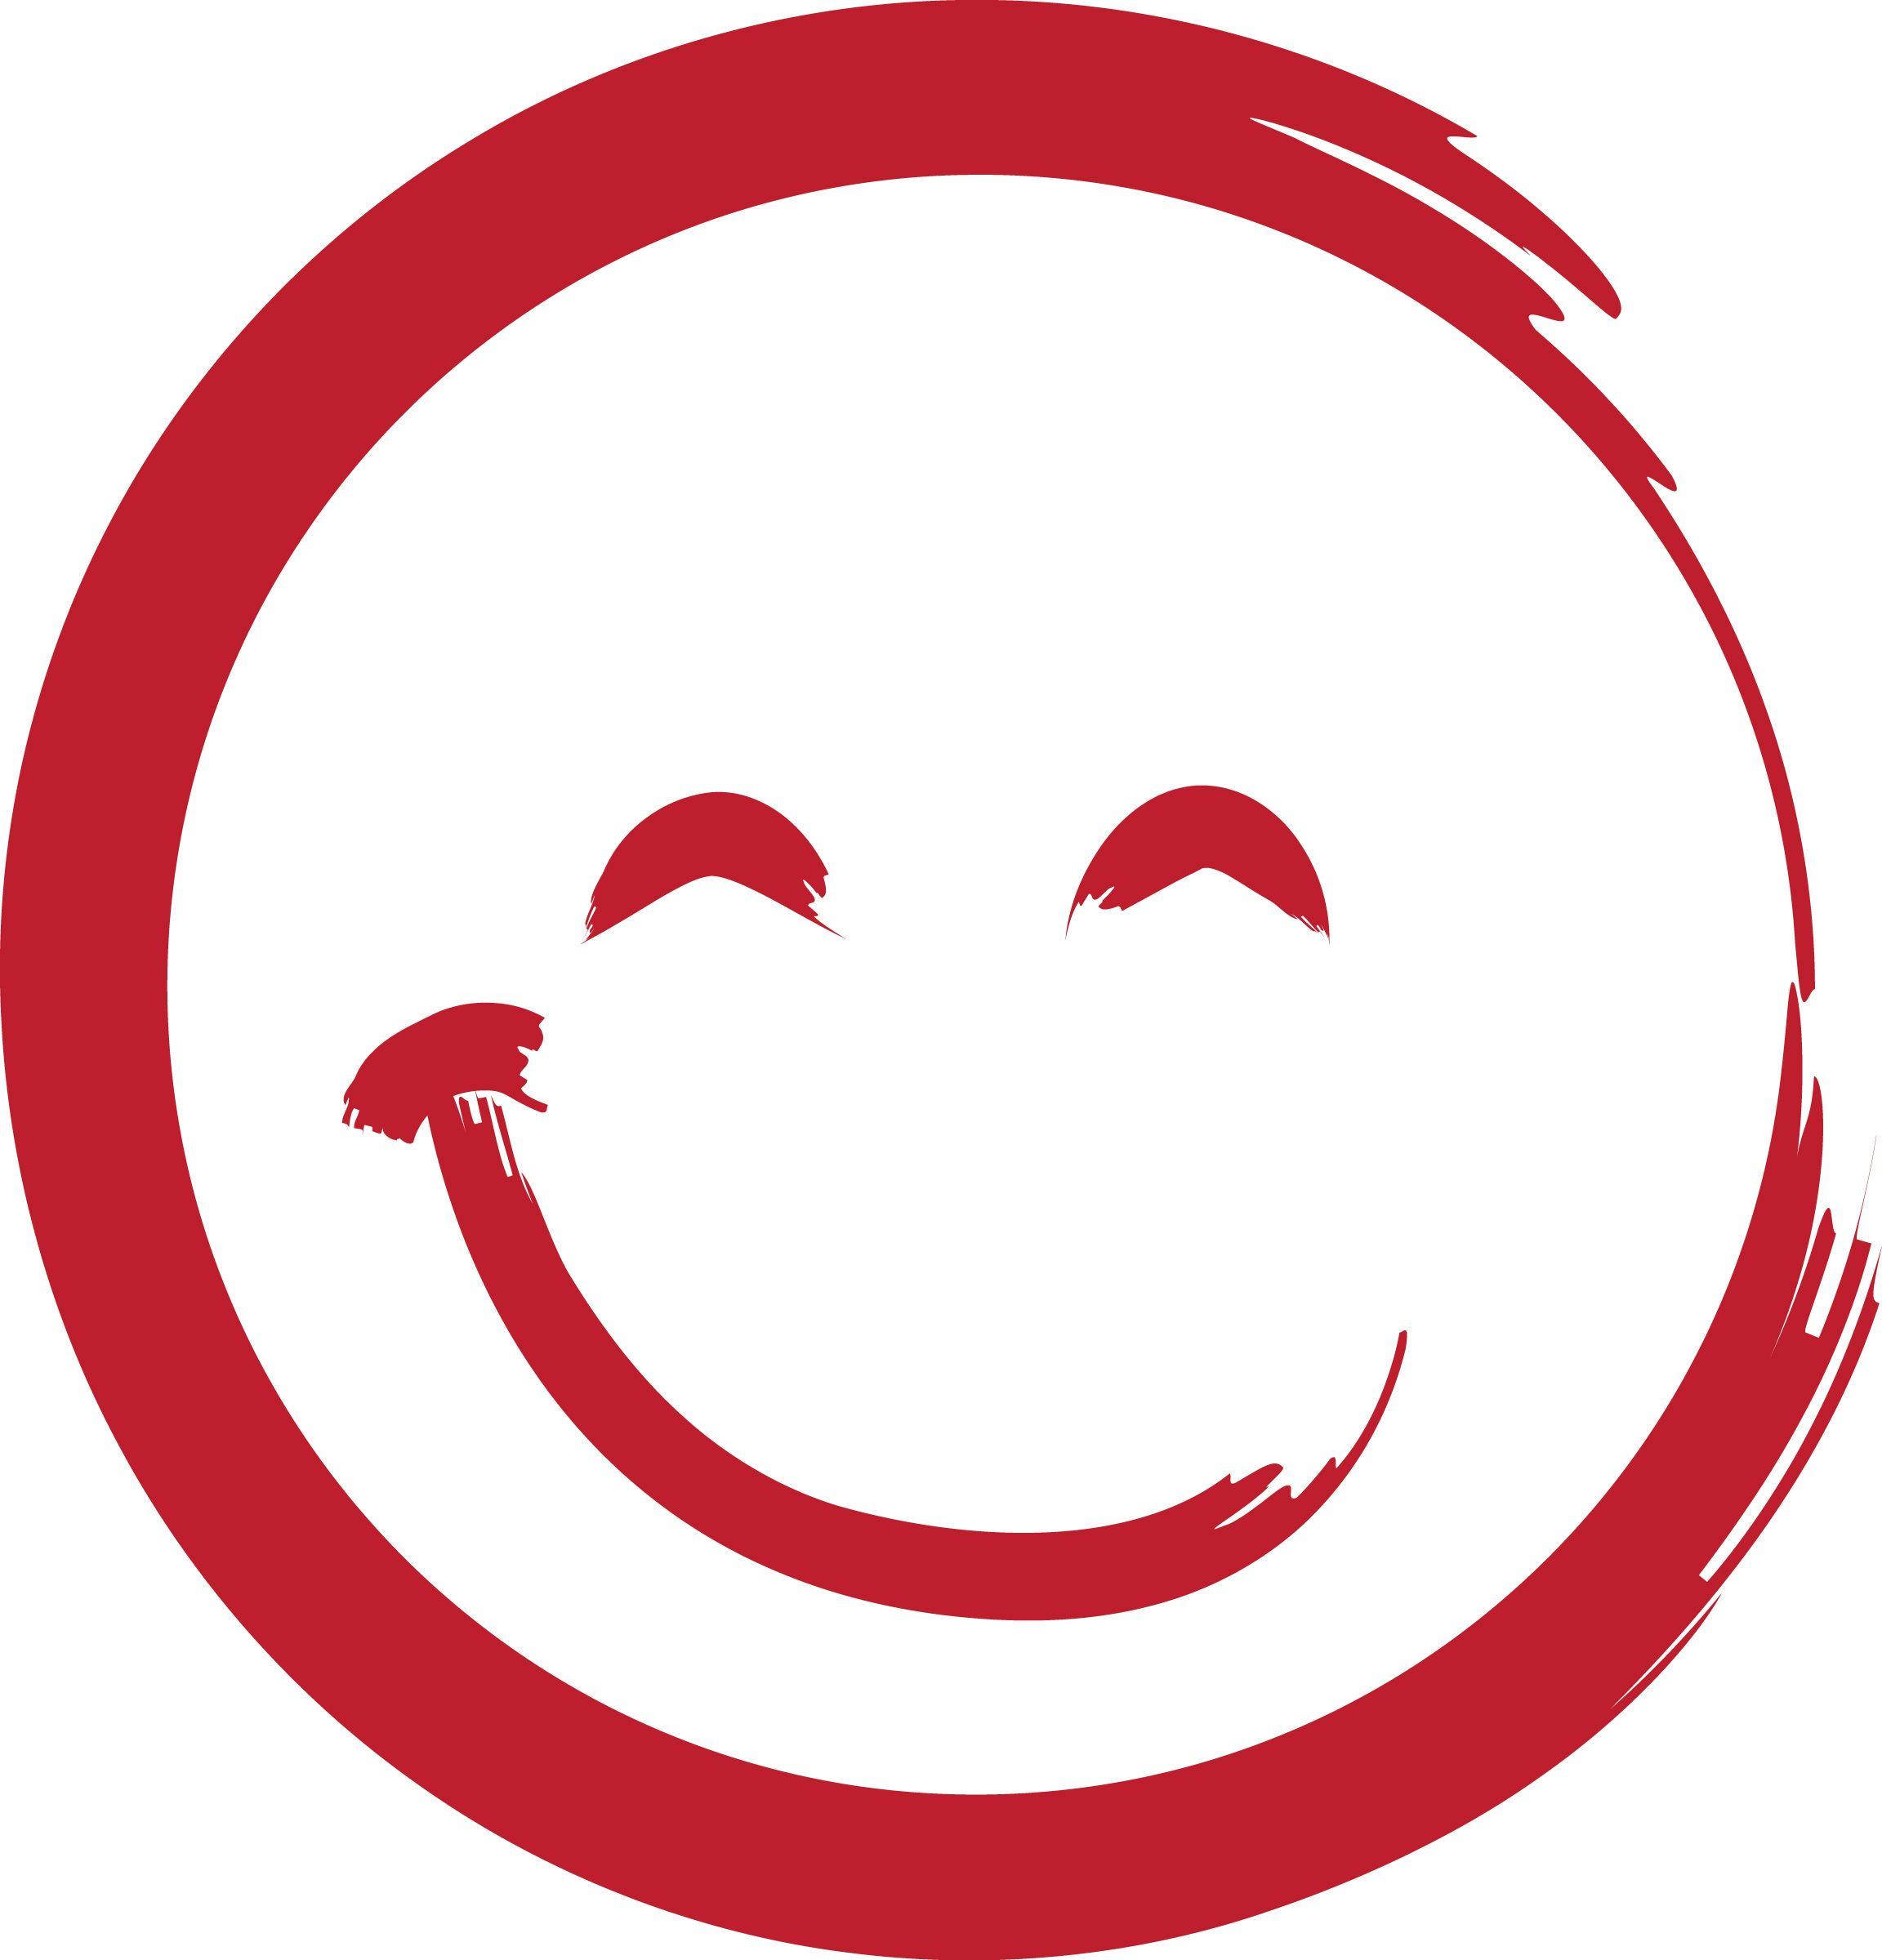 Red Smiley I Logo - Red Smiley Face Clip Art N7 free image